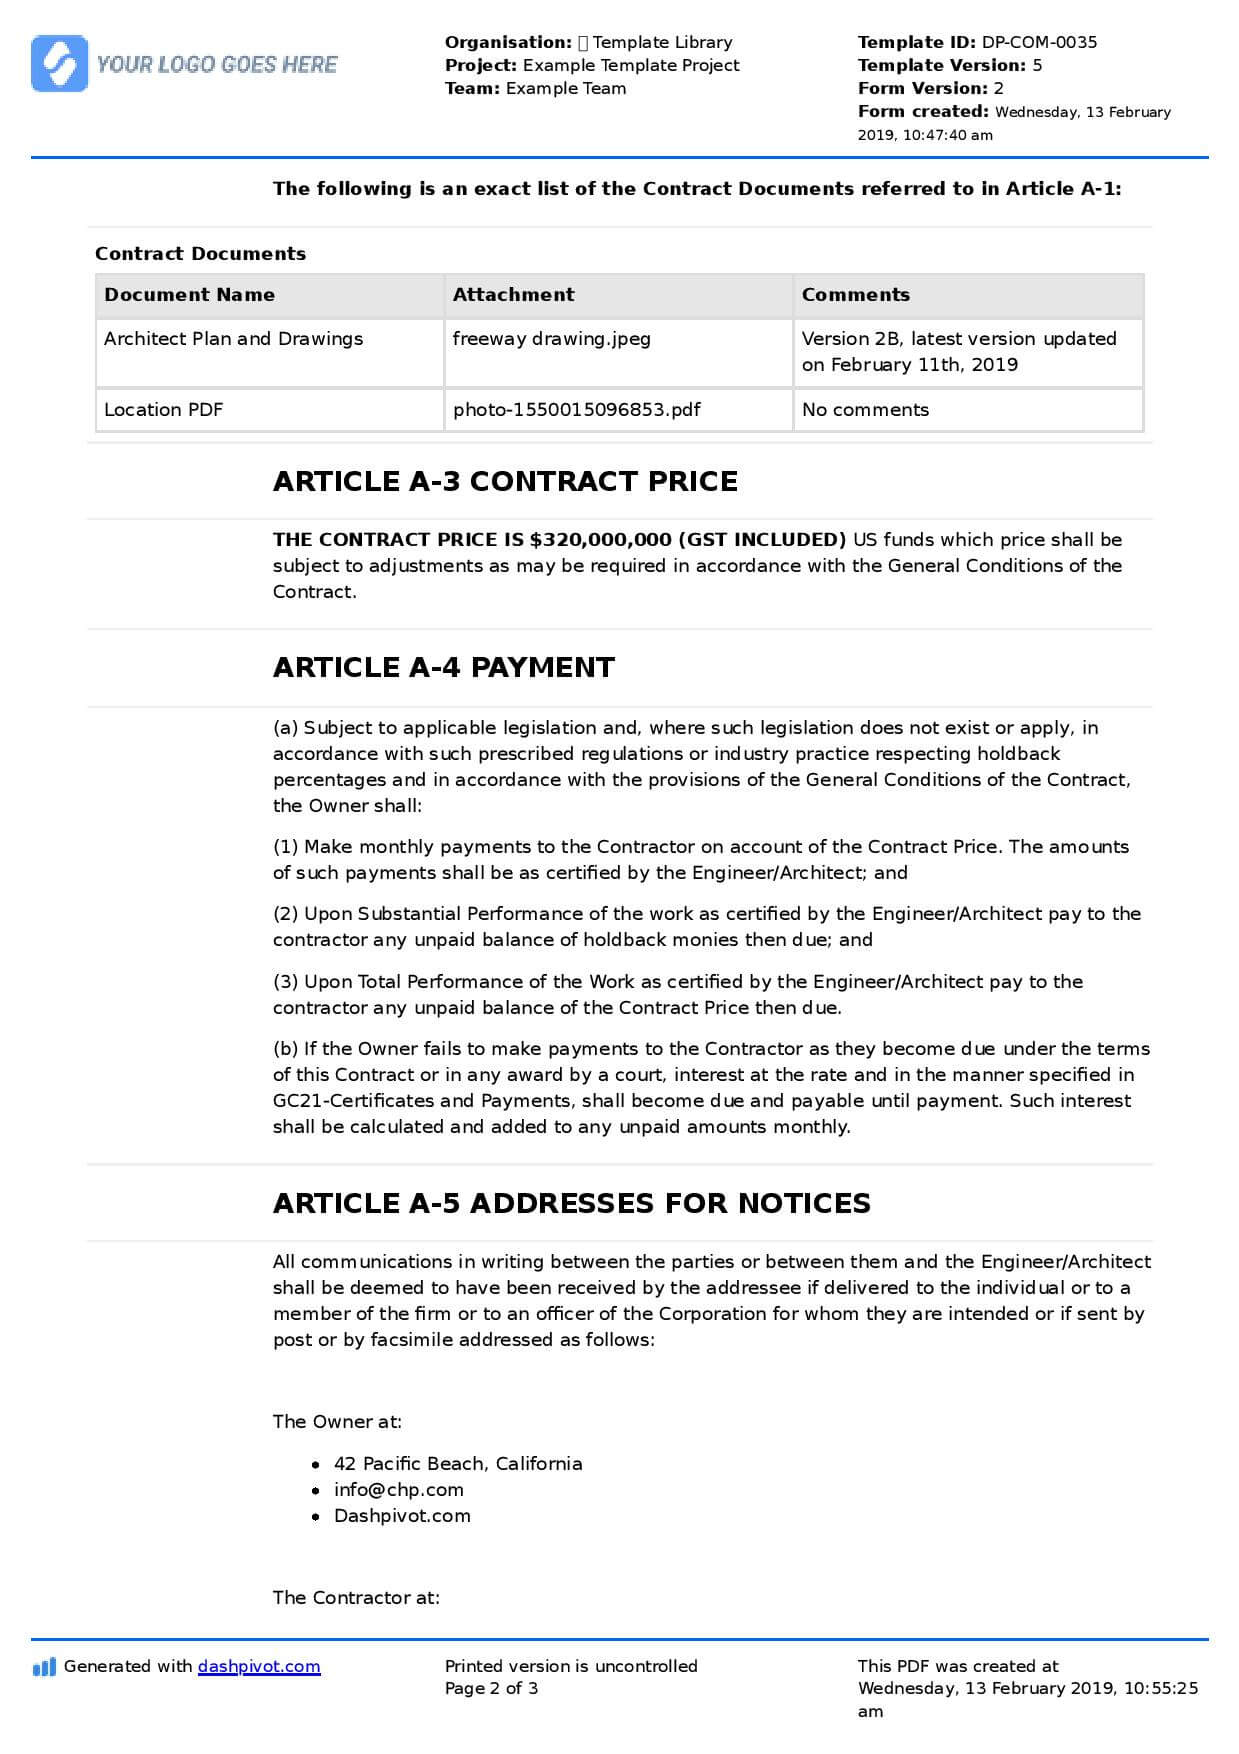 Contract Agreement For Construction Work [Sample + Template] For Construction Payment Certificate Template